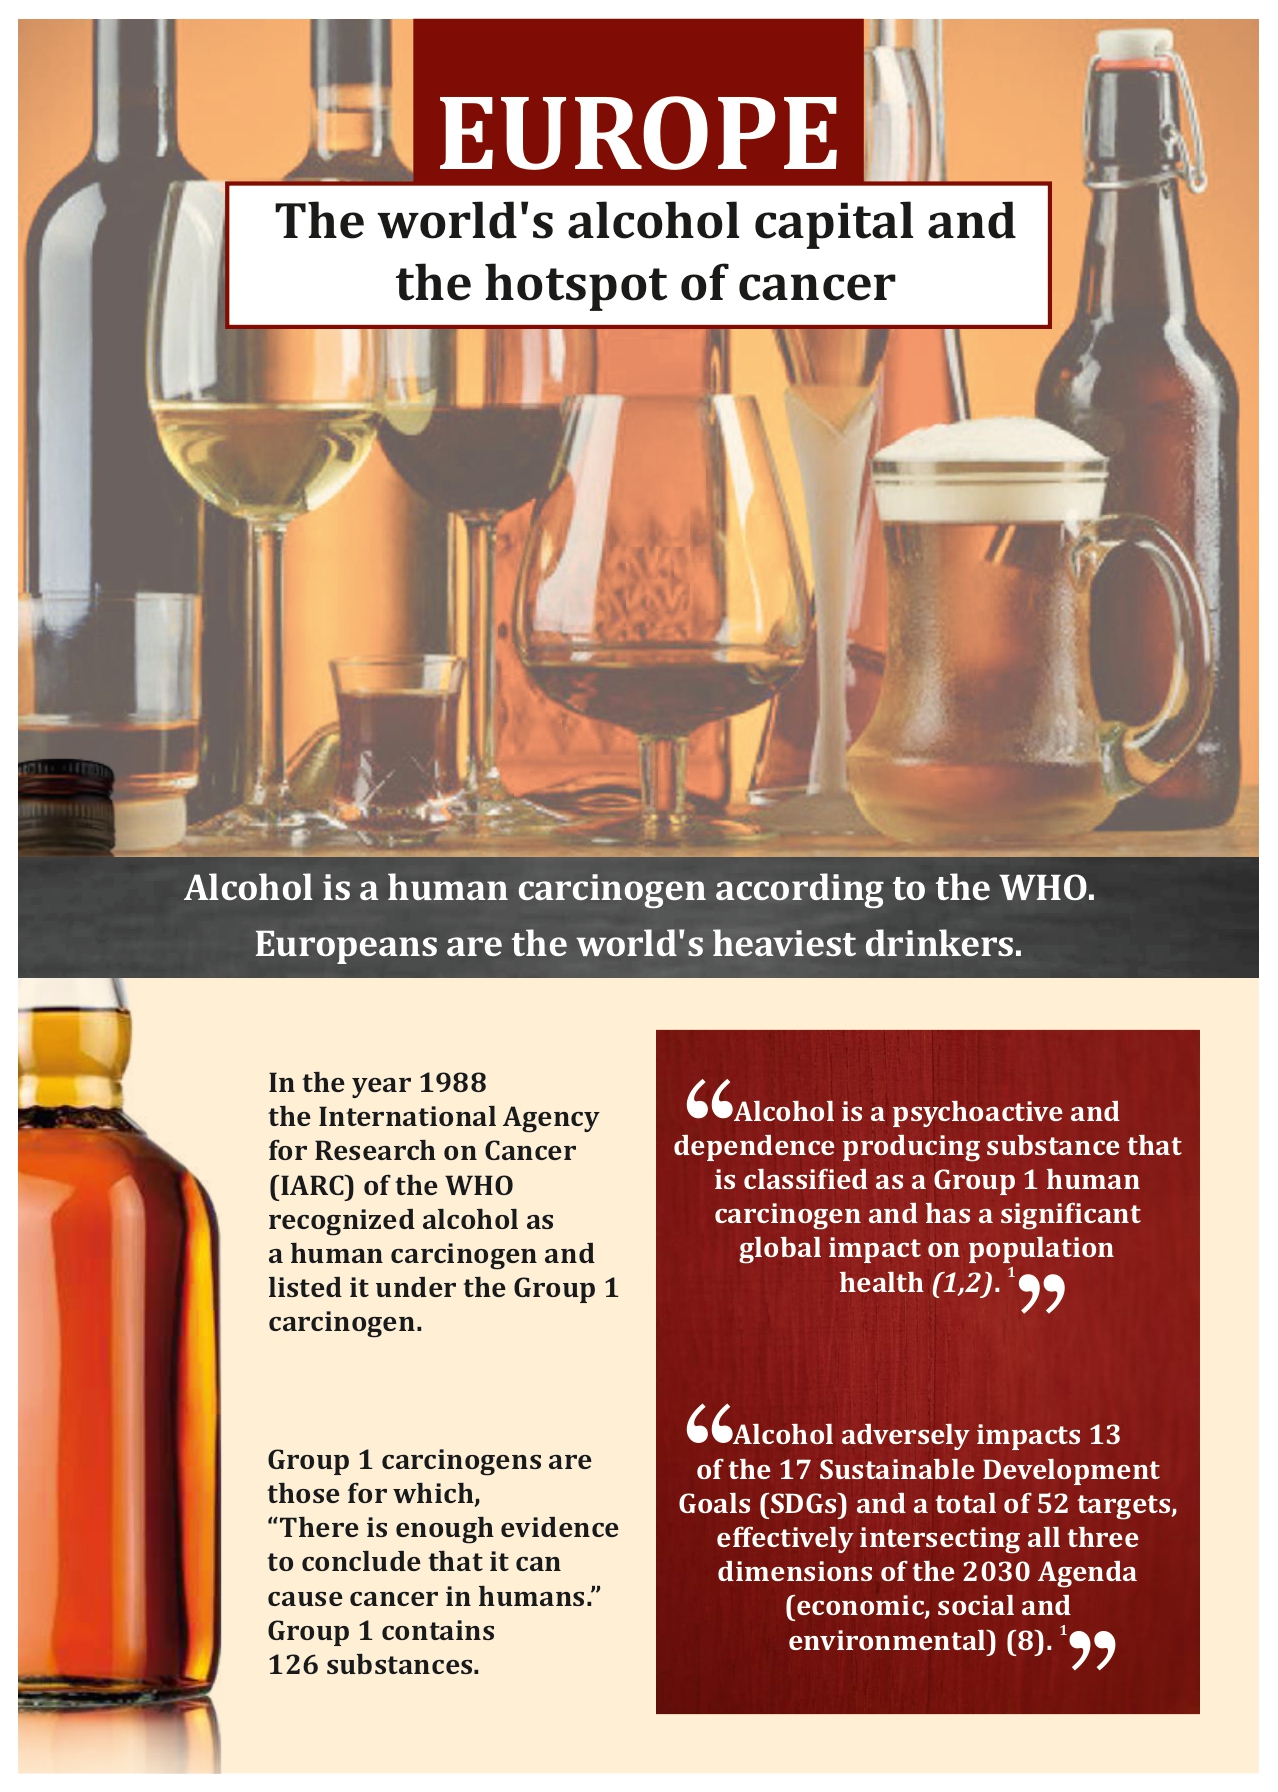 Europe The world's alcohol capital and hotspot of cancer-1